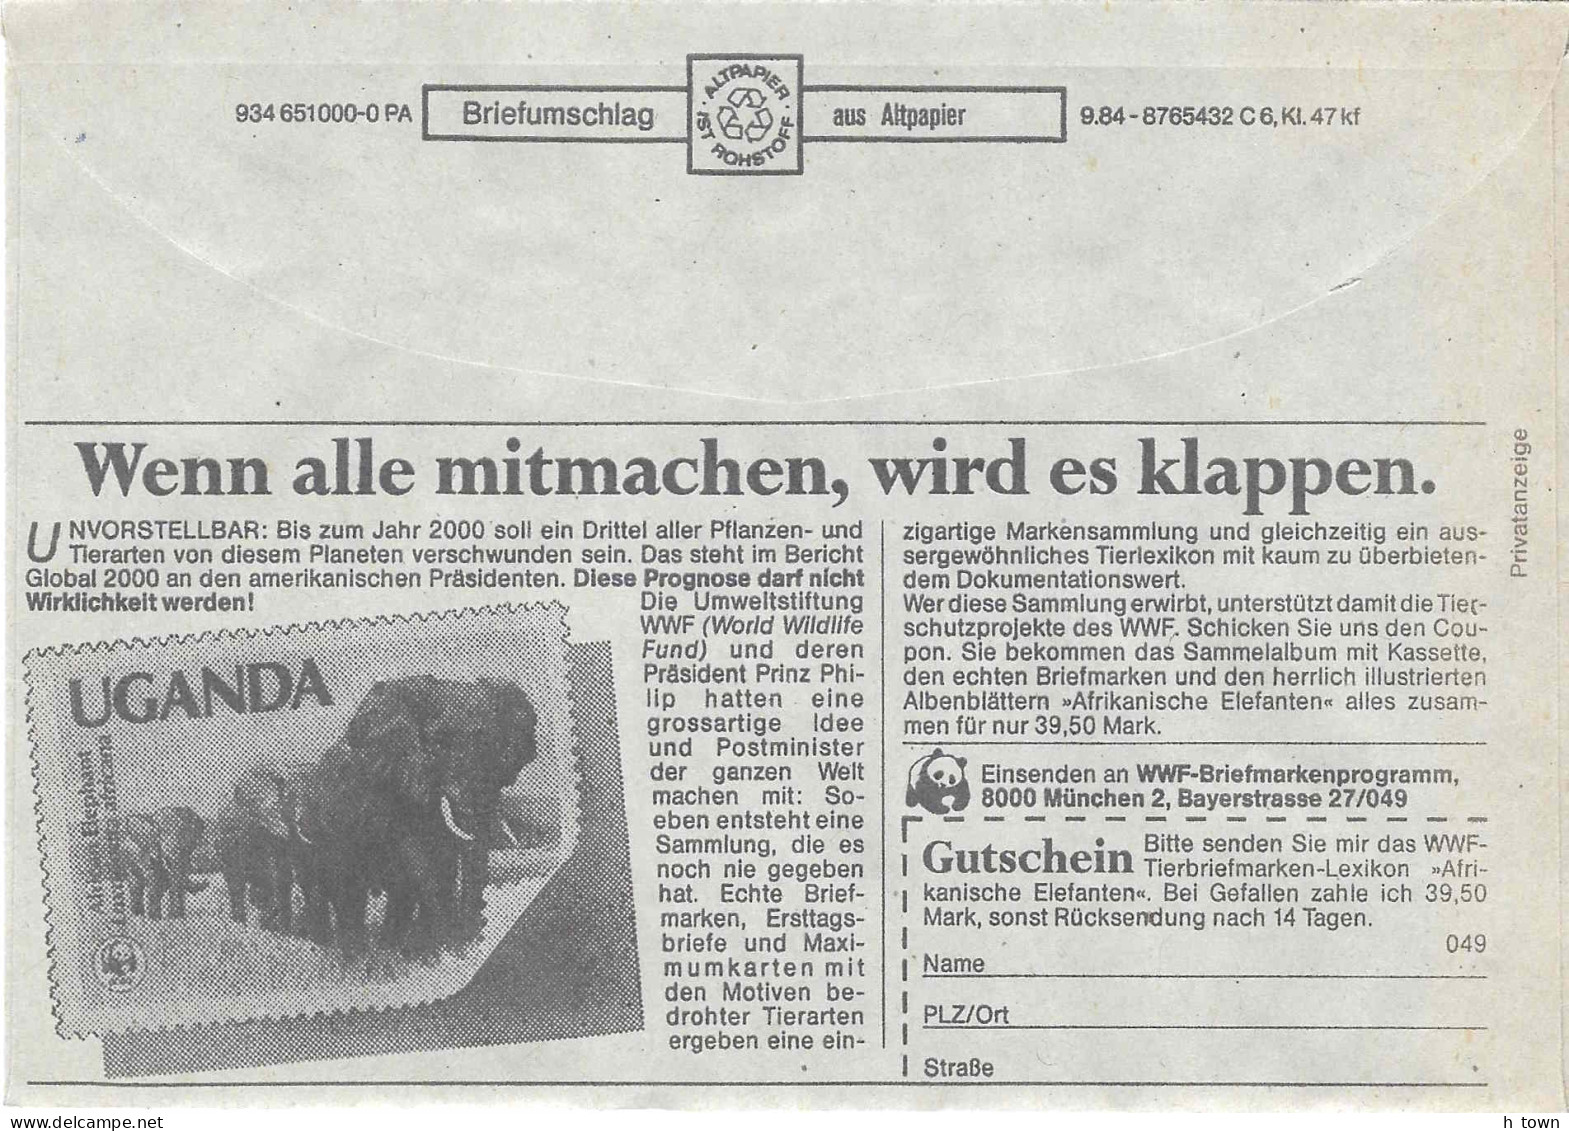 324  Elephant, Timbre, WWF: Env. Port Payée D'Allemagne - Stamp, WWF-Advertising On PP Cover From Germany  - Elefantes